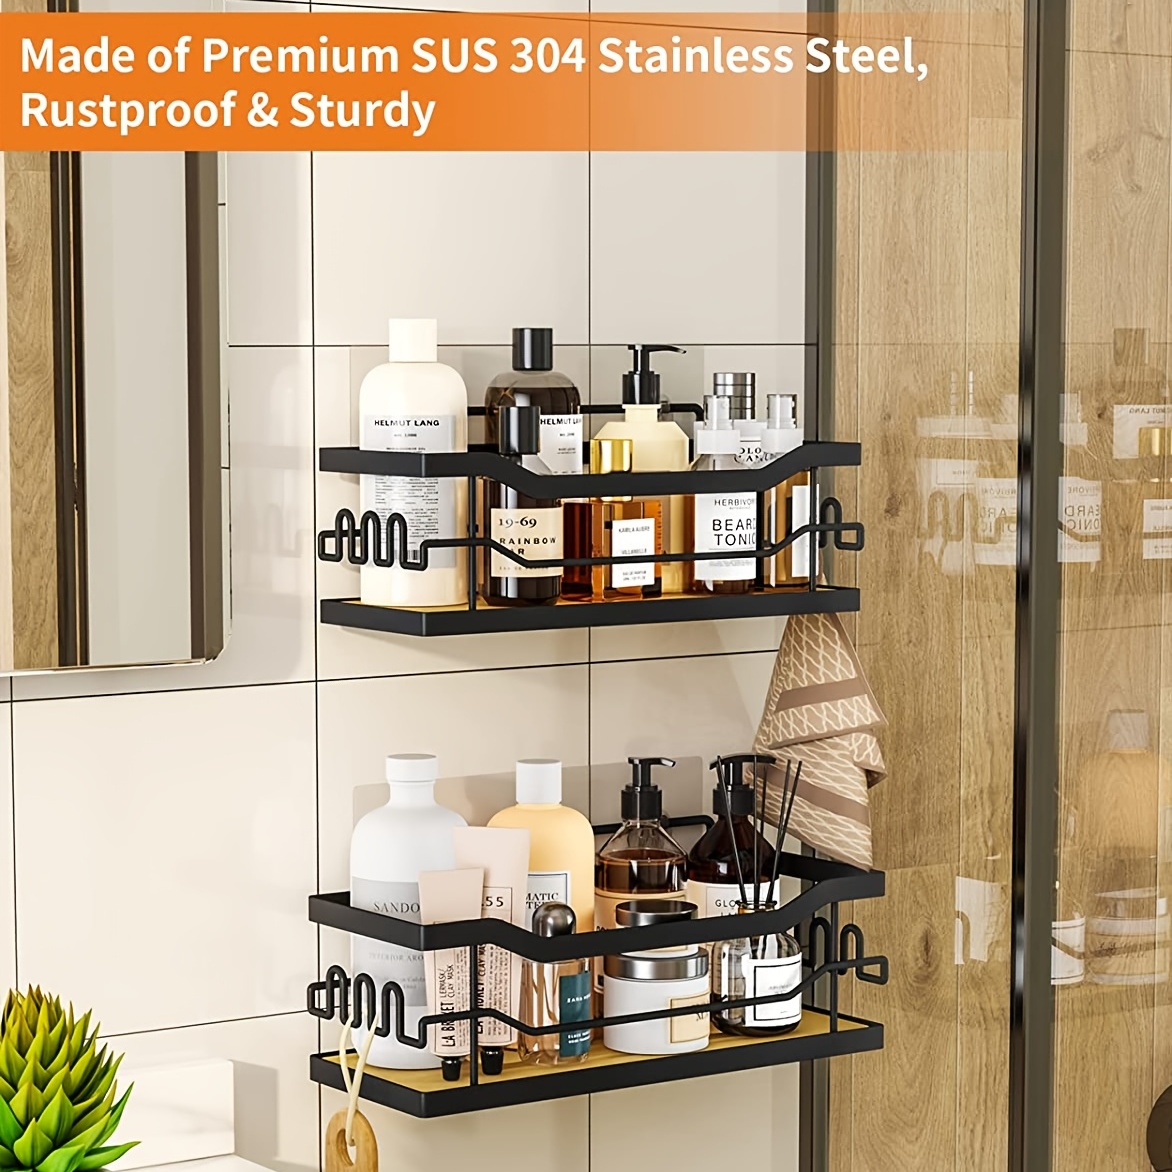 ODesign Adhesive Bathroom Shelf Organizer Shower Caddy Kitchen Spice Rack  Wall Mounted No Drilling SUS304 Stainless Steel Rustproof - 2